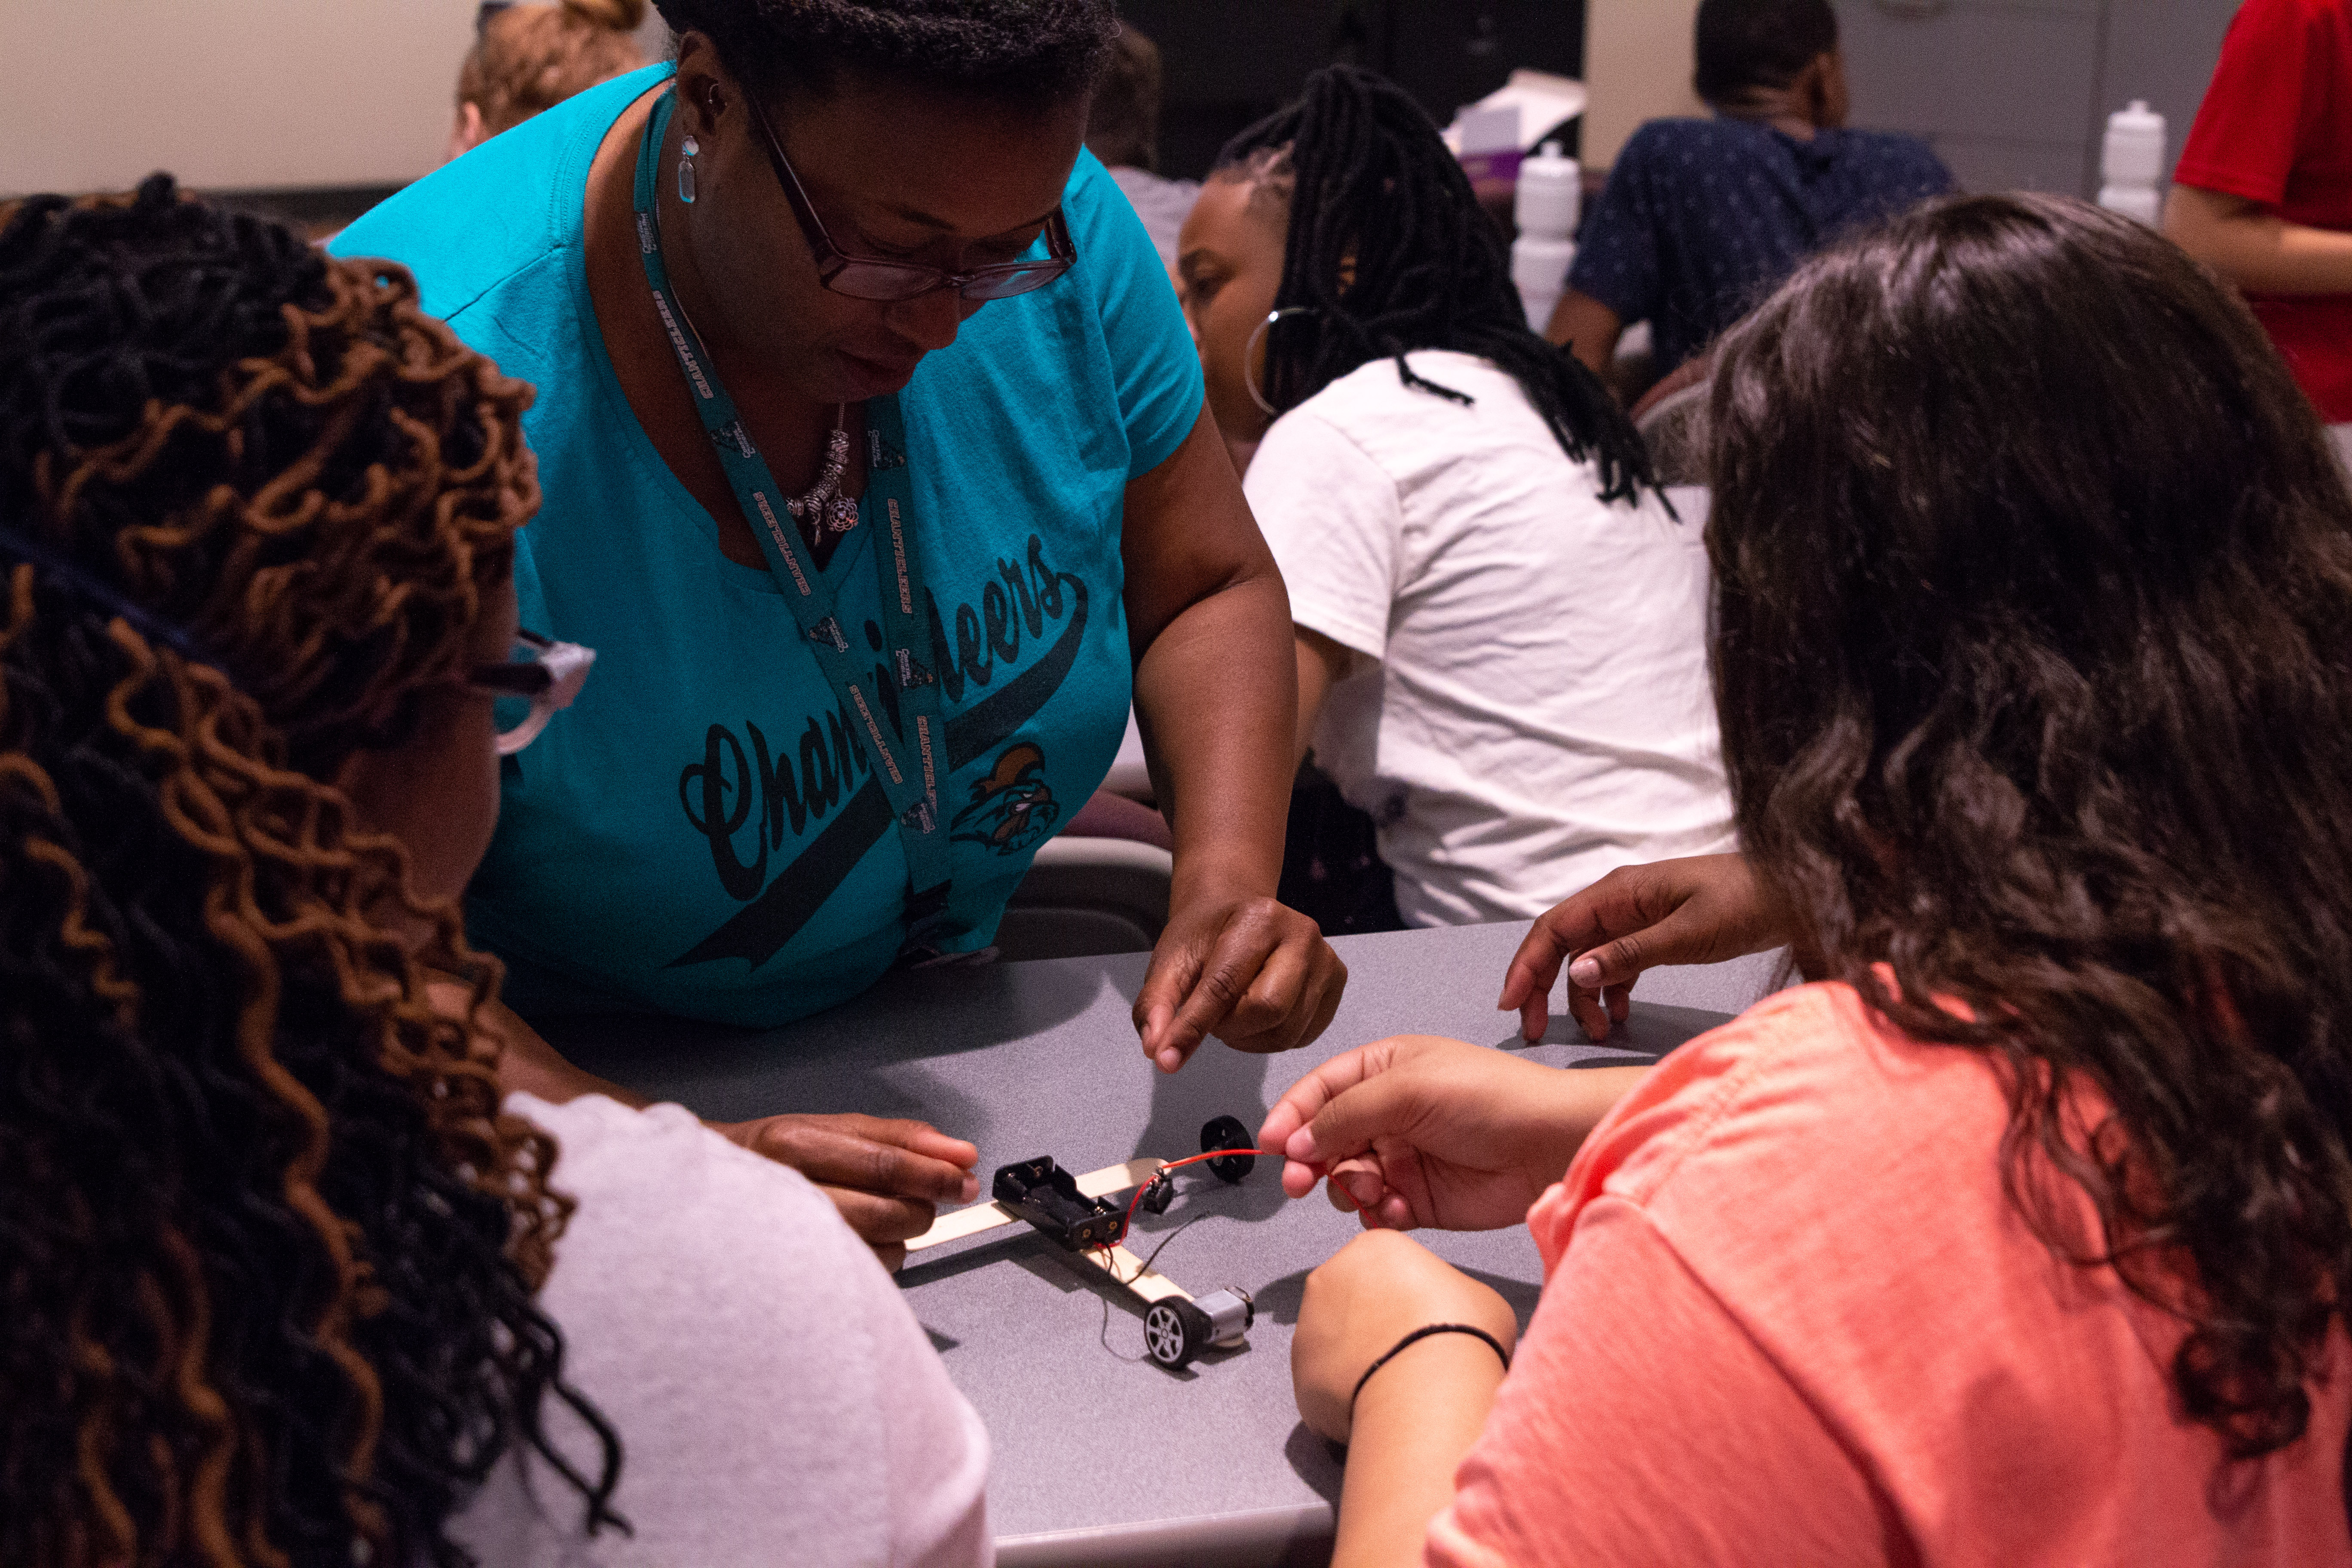 Students build their own EcoCAR with assistance from UA alumna Dr. Adriane Sheffield, who now teaches at Coastal Carolina University but returned to her alma mater to teach at this camp again this summer.